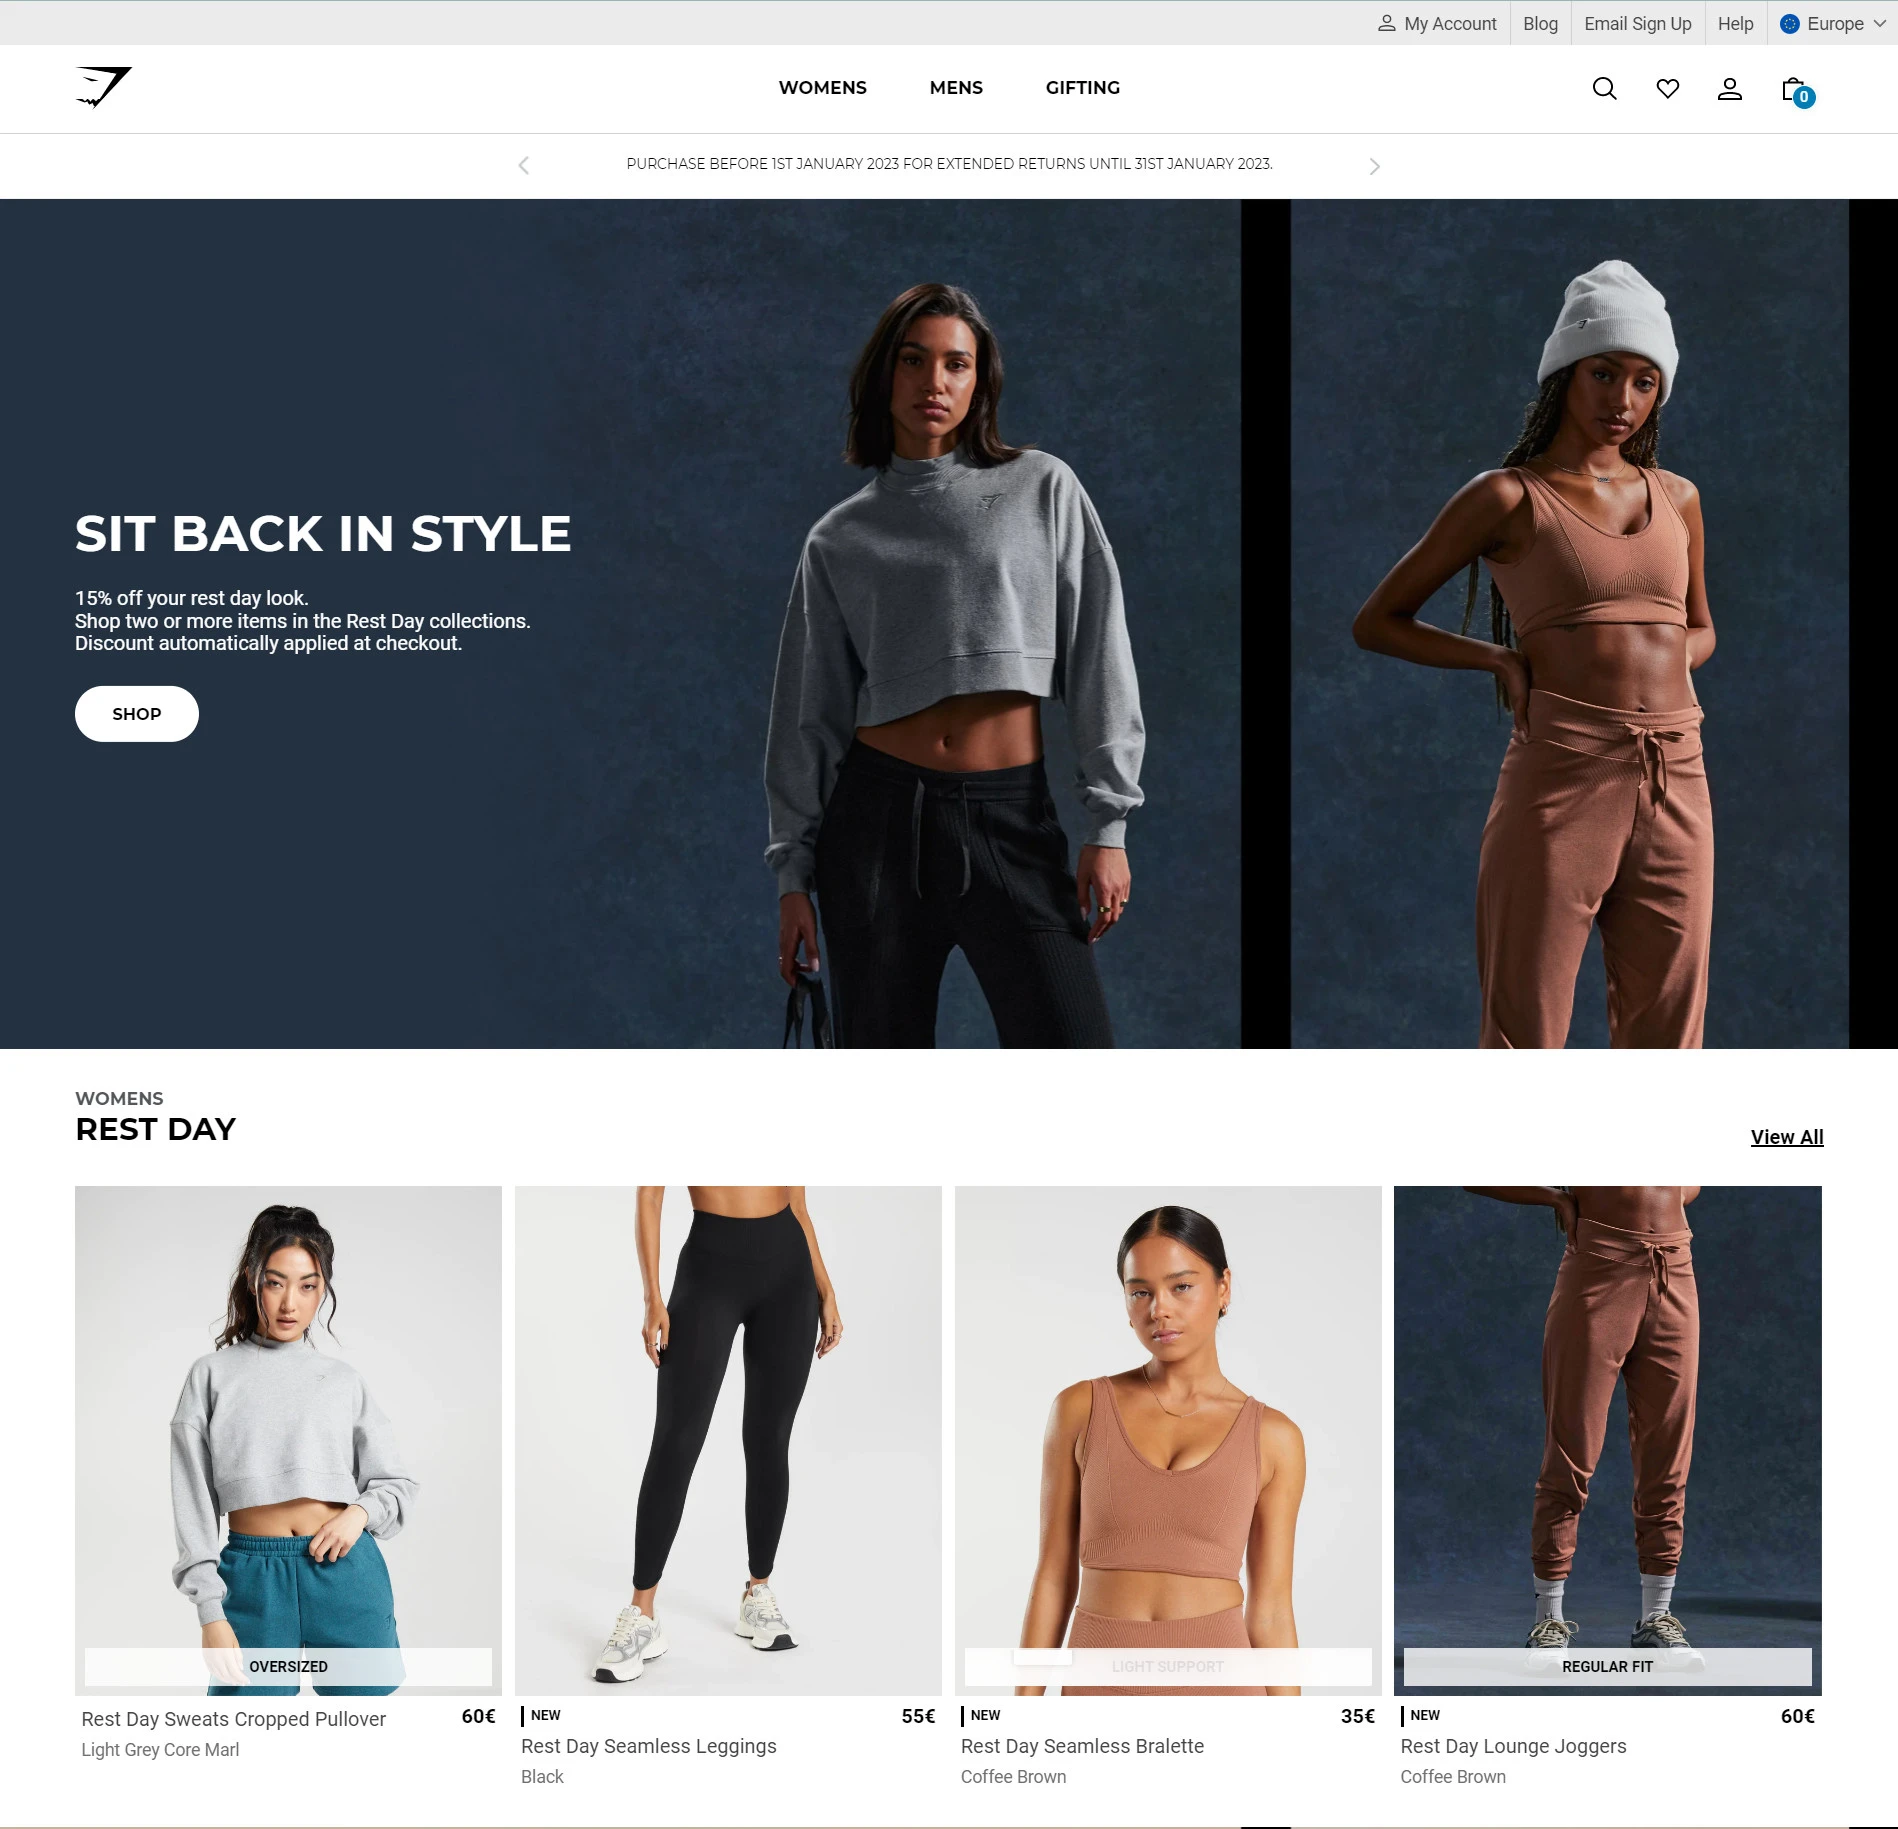 You can view Gymshark’s full homepage here for more inspiration